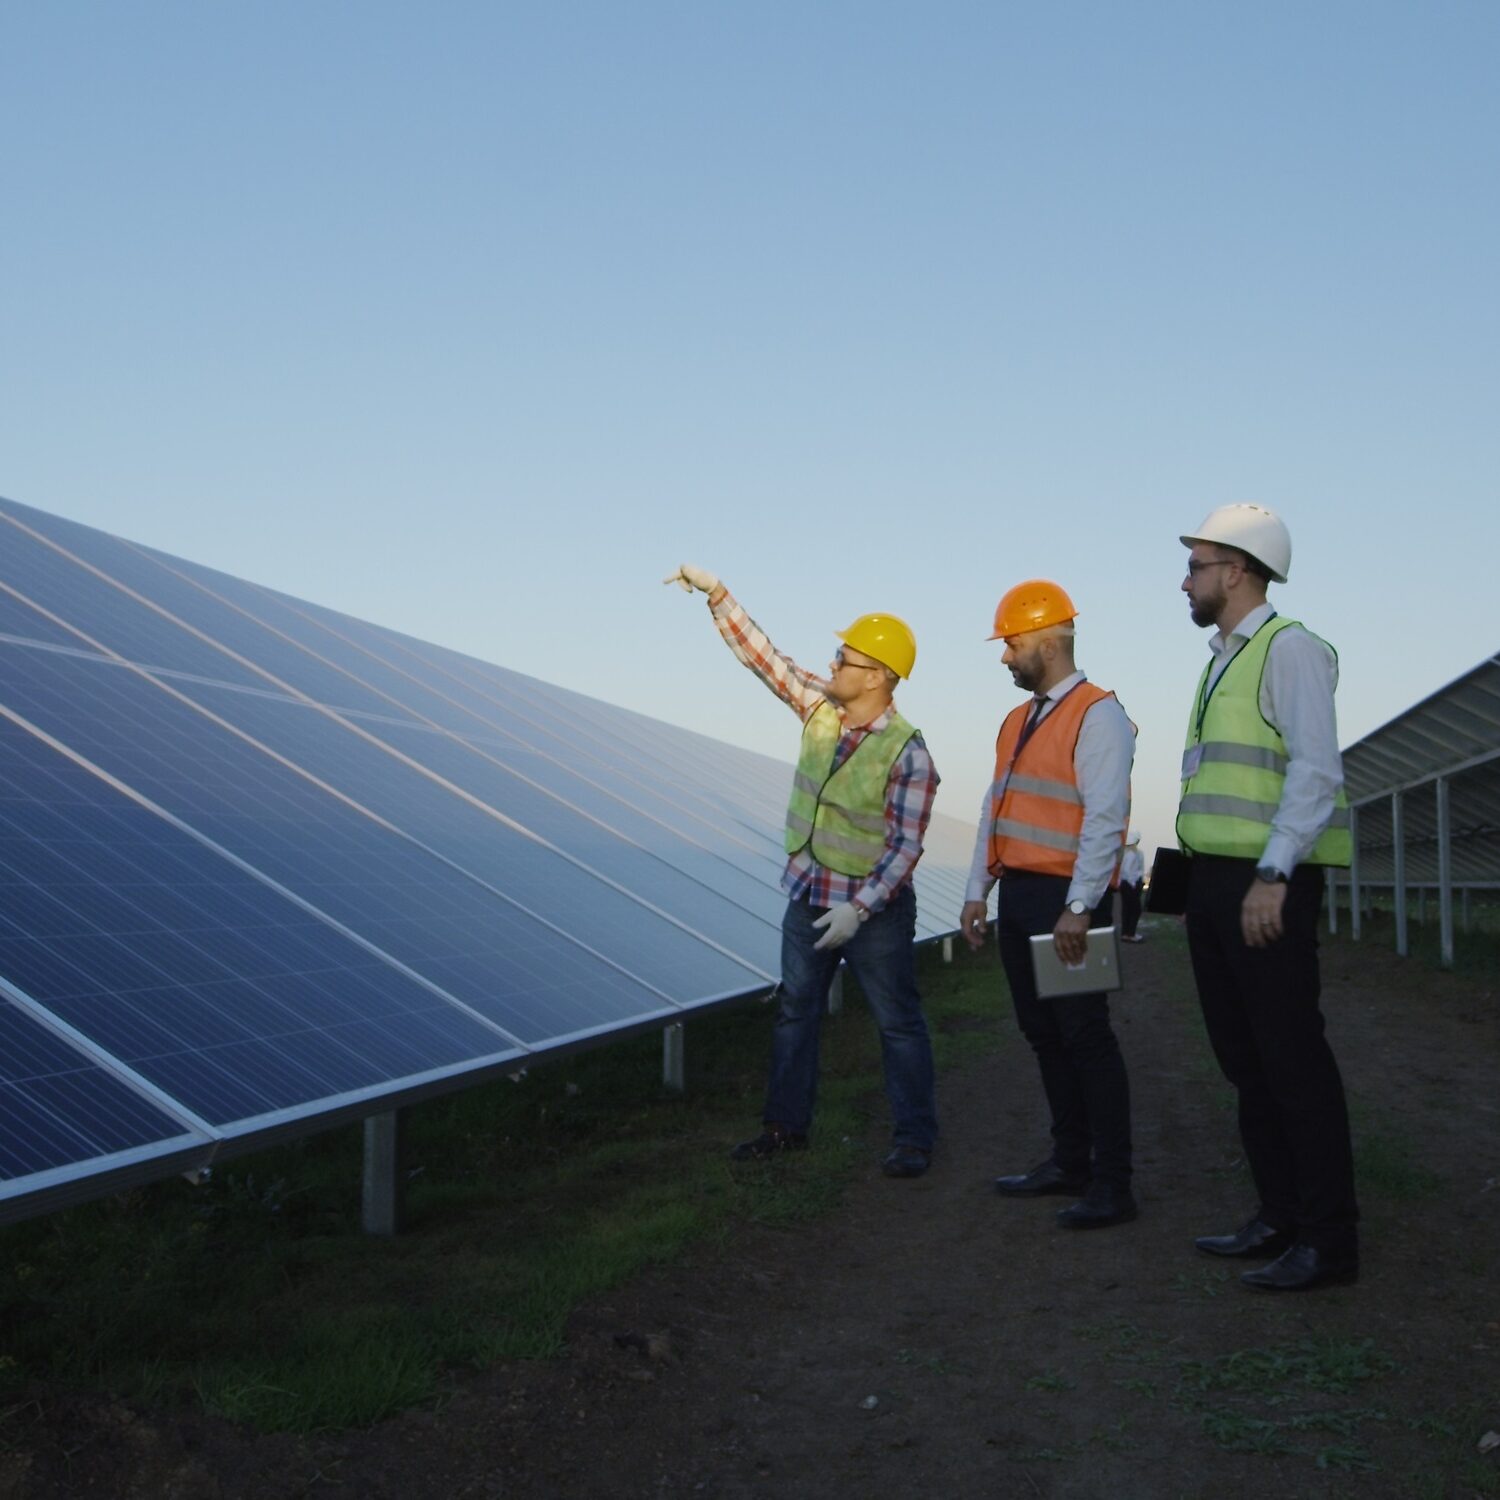 Group of adult men on field with rows of solar panels having professional discussion while working in team